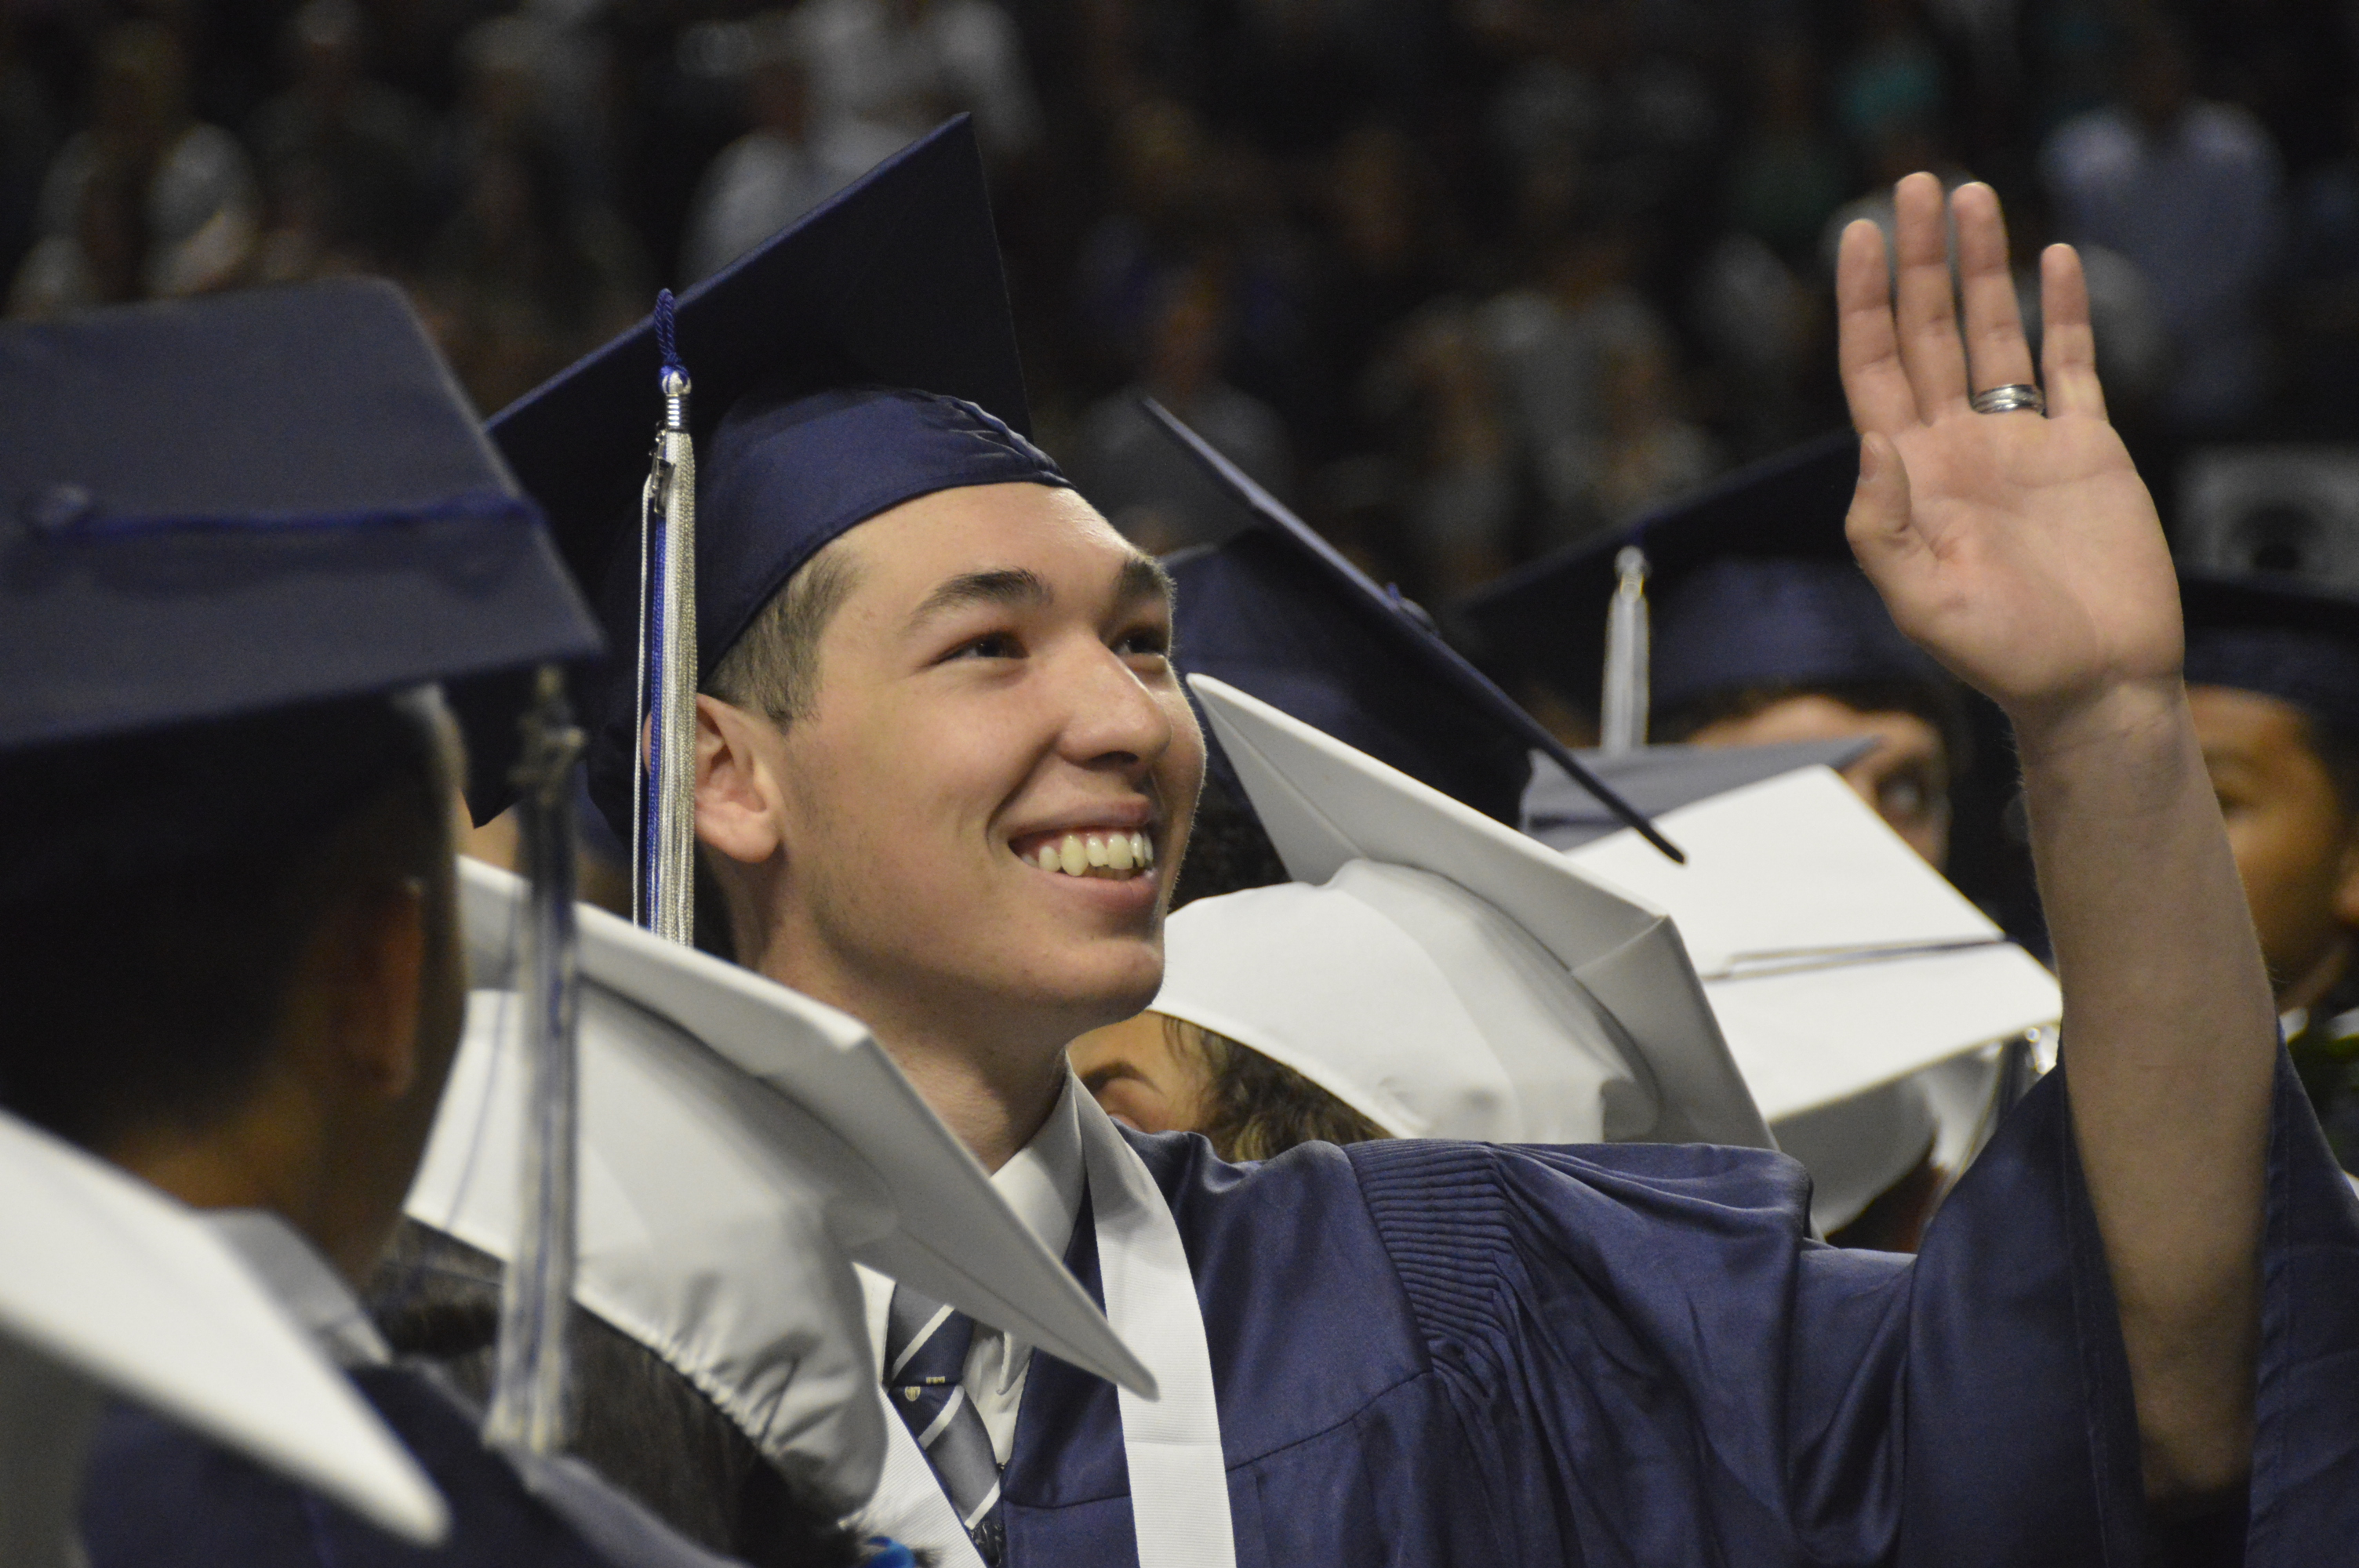 Graduation rate continues to rise